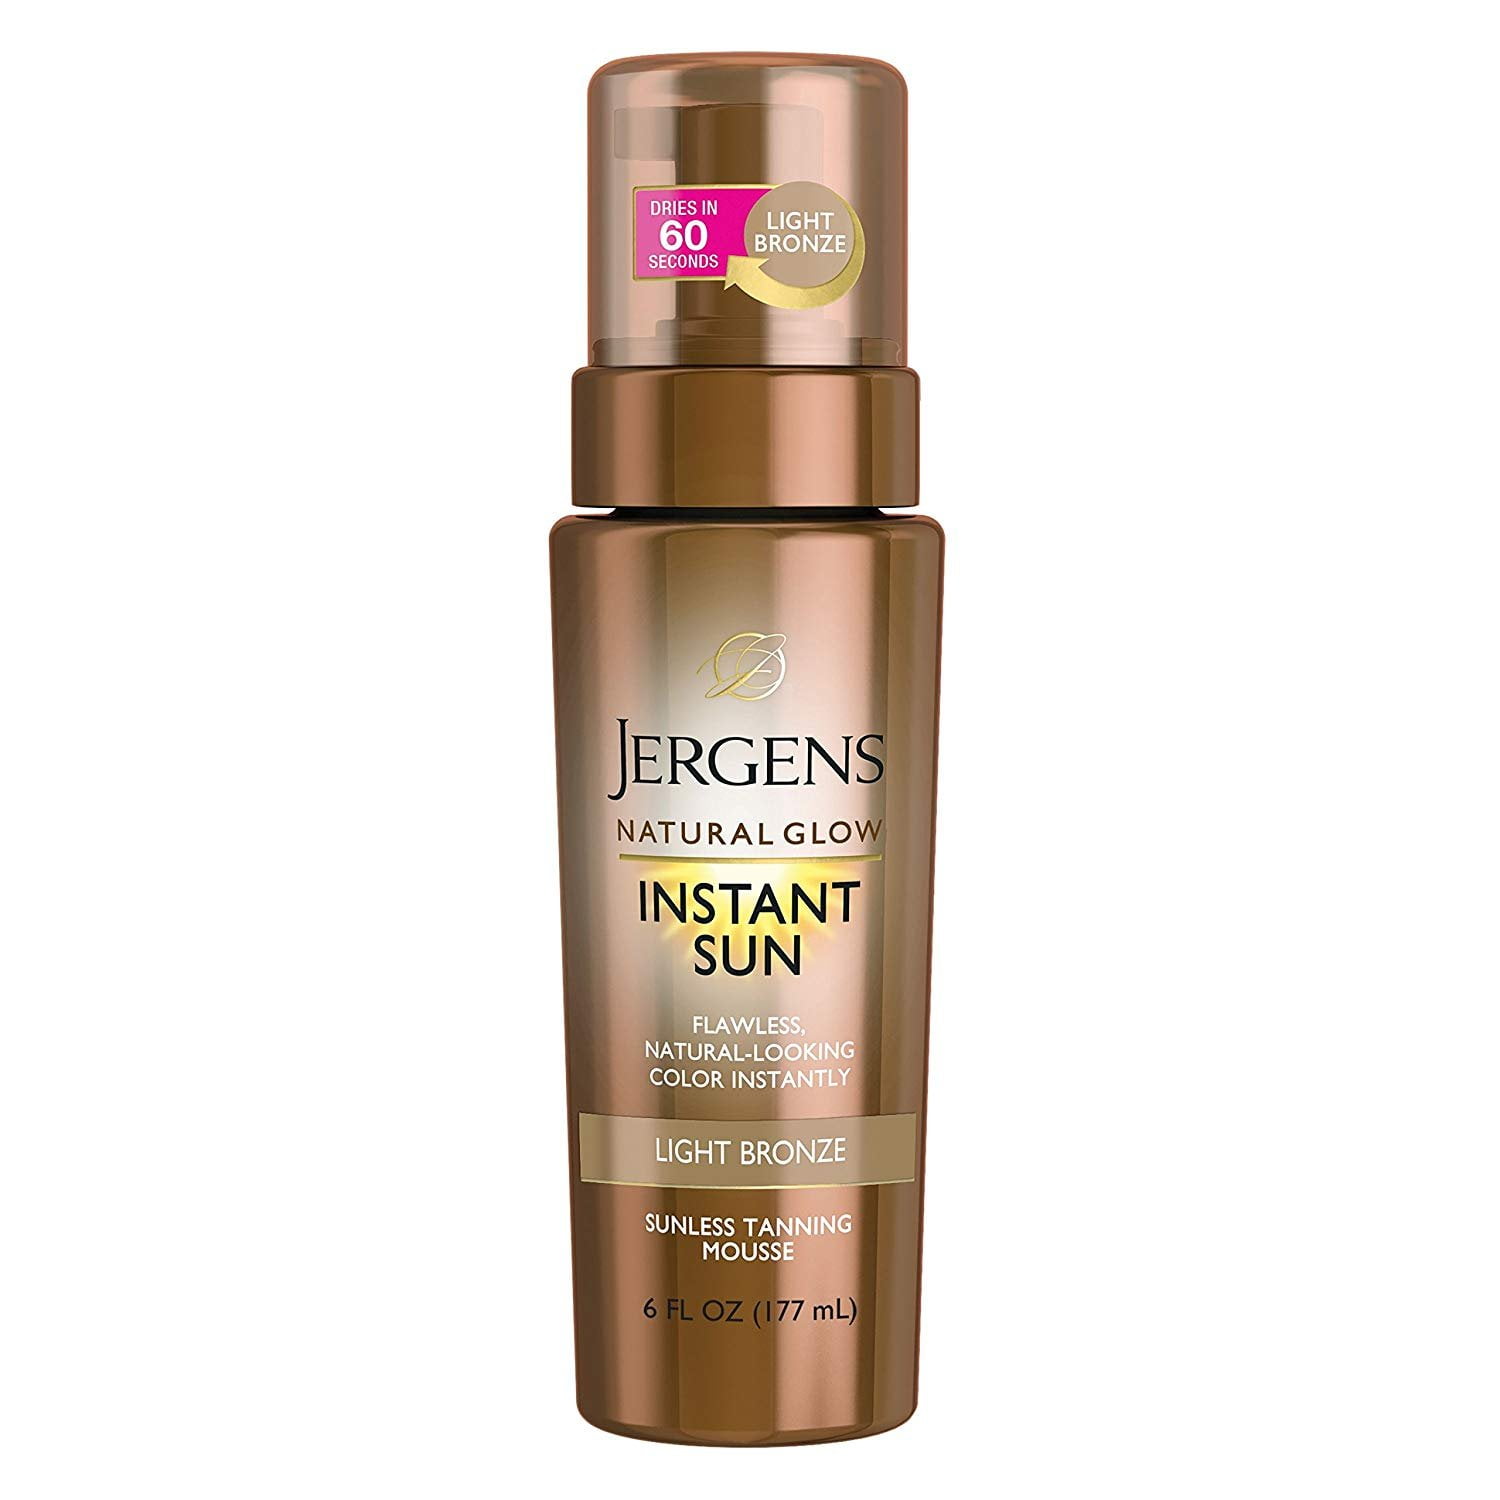 Jergens Natural Glow Instant Sun Sunless Tanning Mousse For Body Light Bronze 6 Ounces